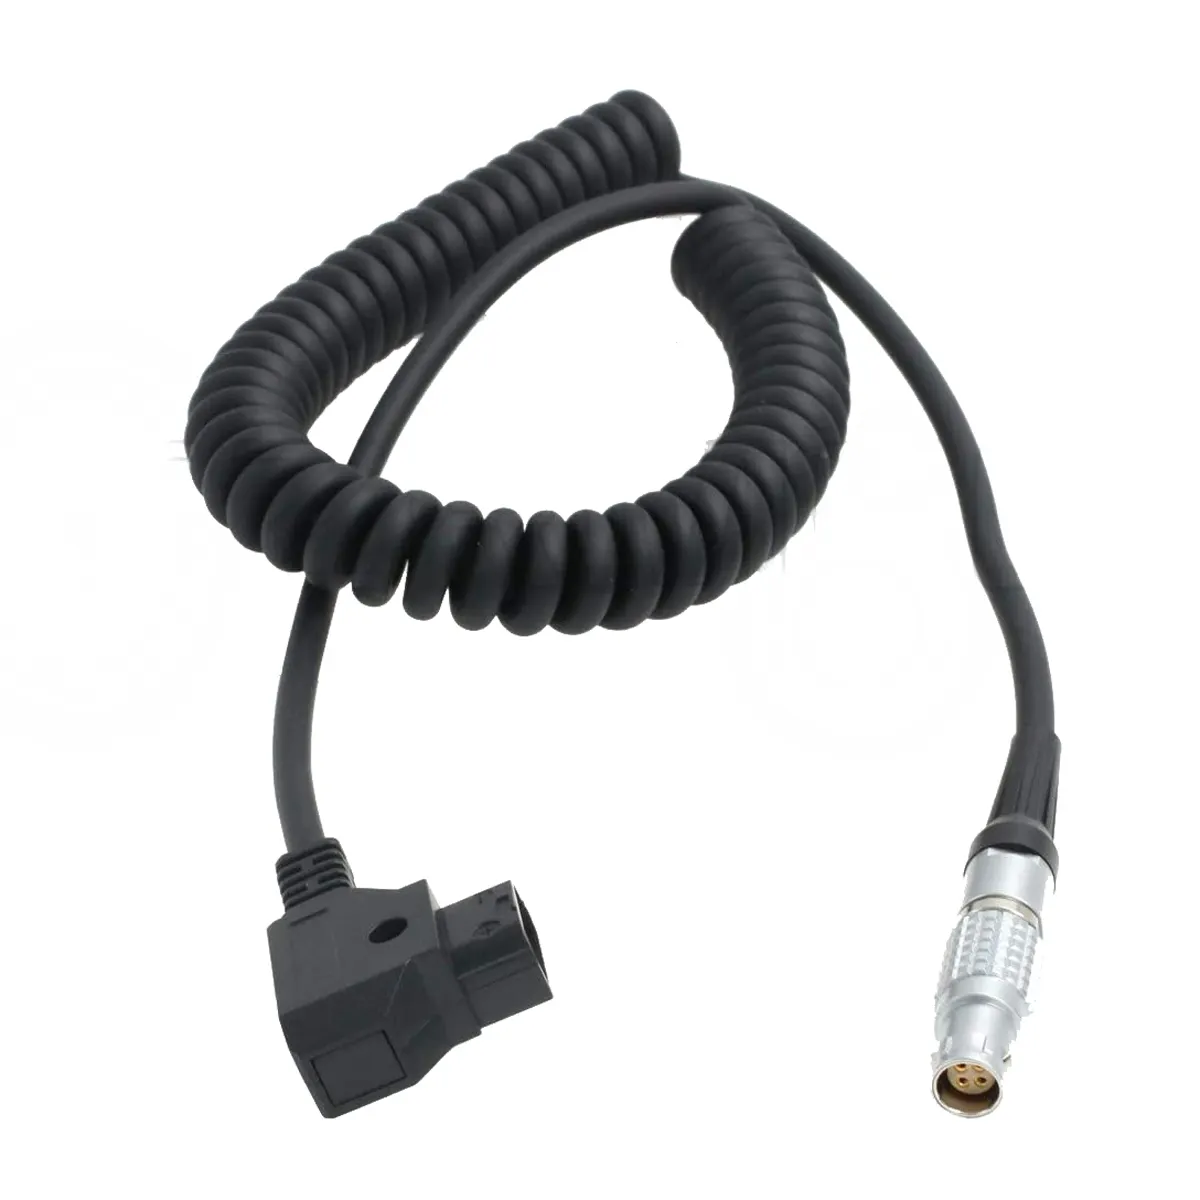 D Tap to 1B 4 Pin Female Power Cable for Canon Mark II C100 C300 C500